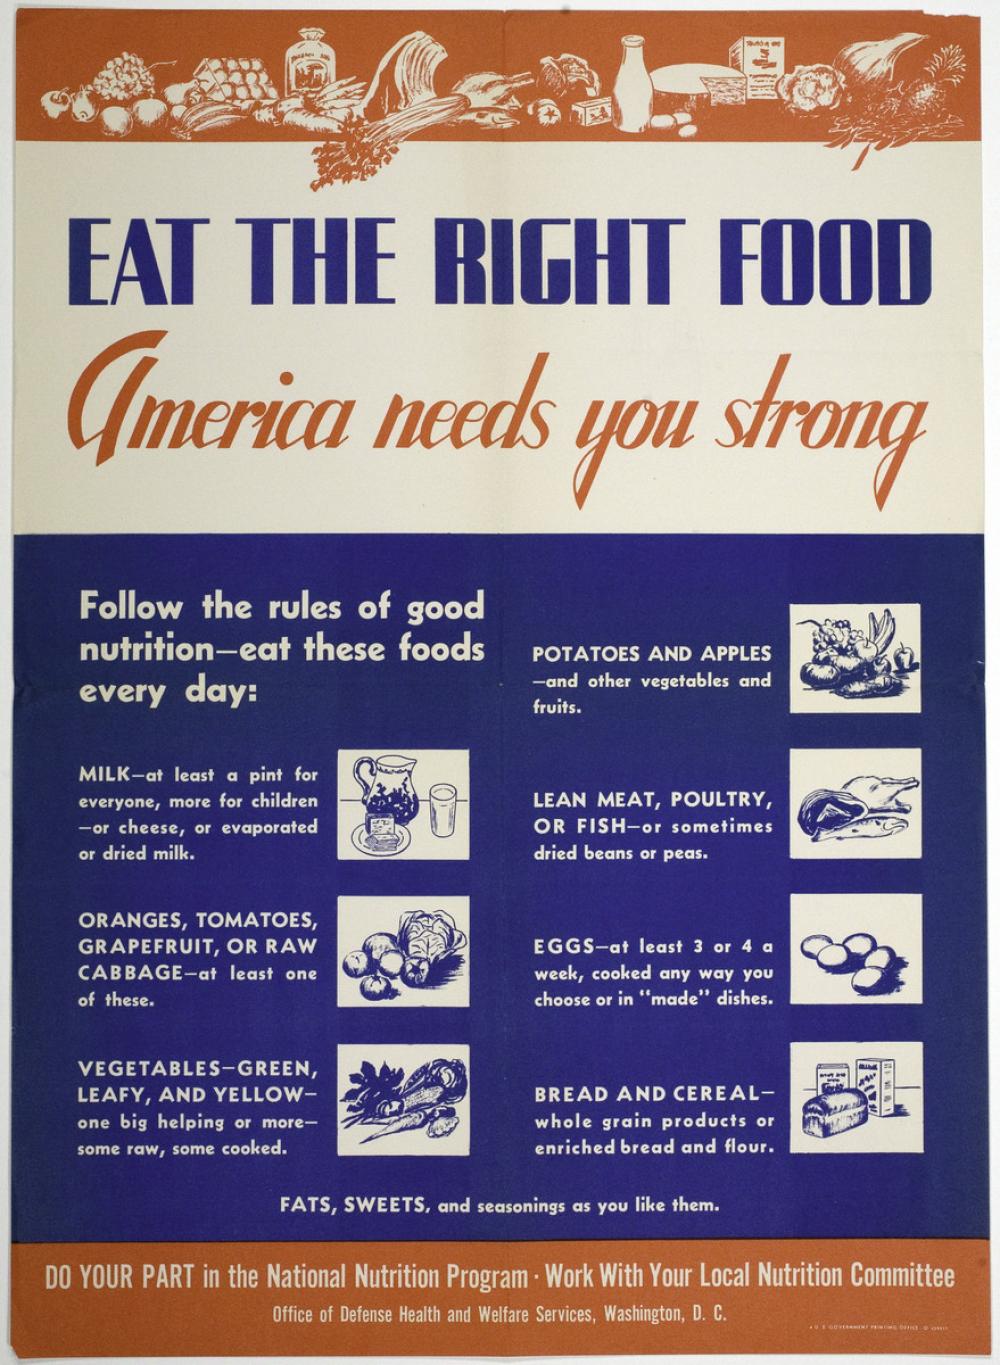 Unknown (designer); United States Office of Defense Health and Welfare Services (publisher) (American), Eat the Right Food, America Needs You Strong, 1941-1945